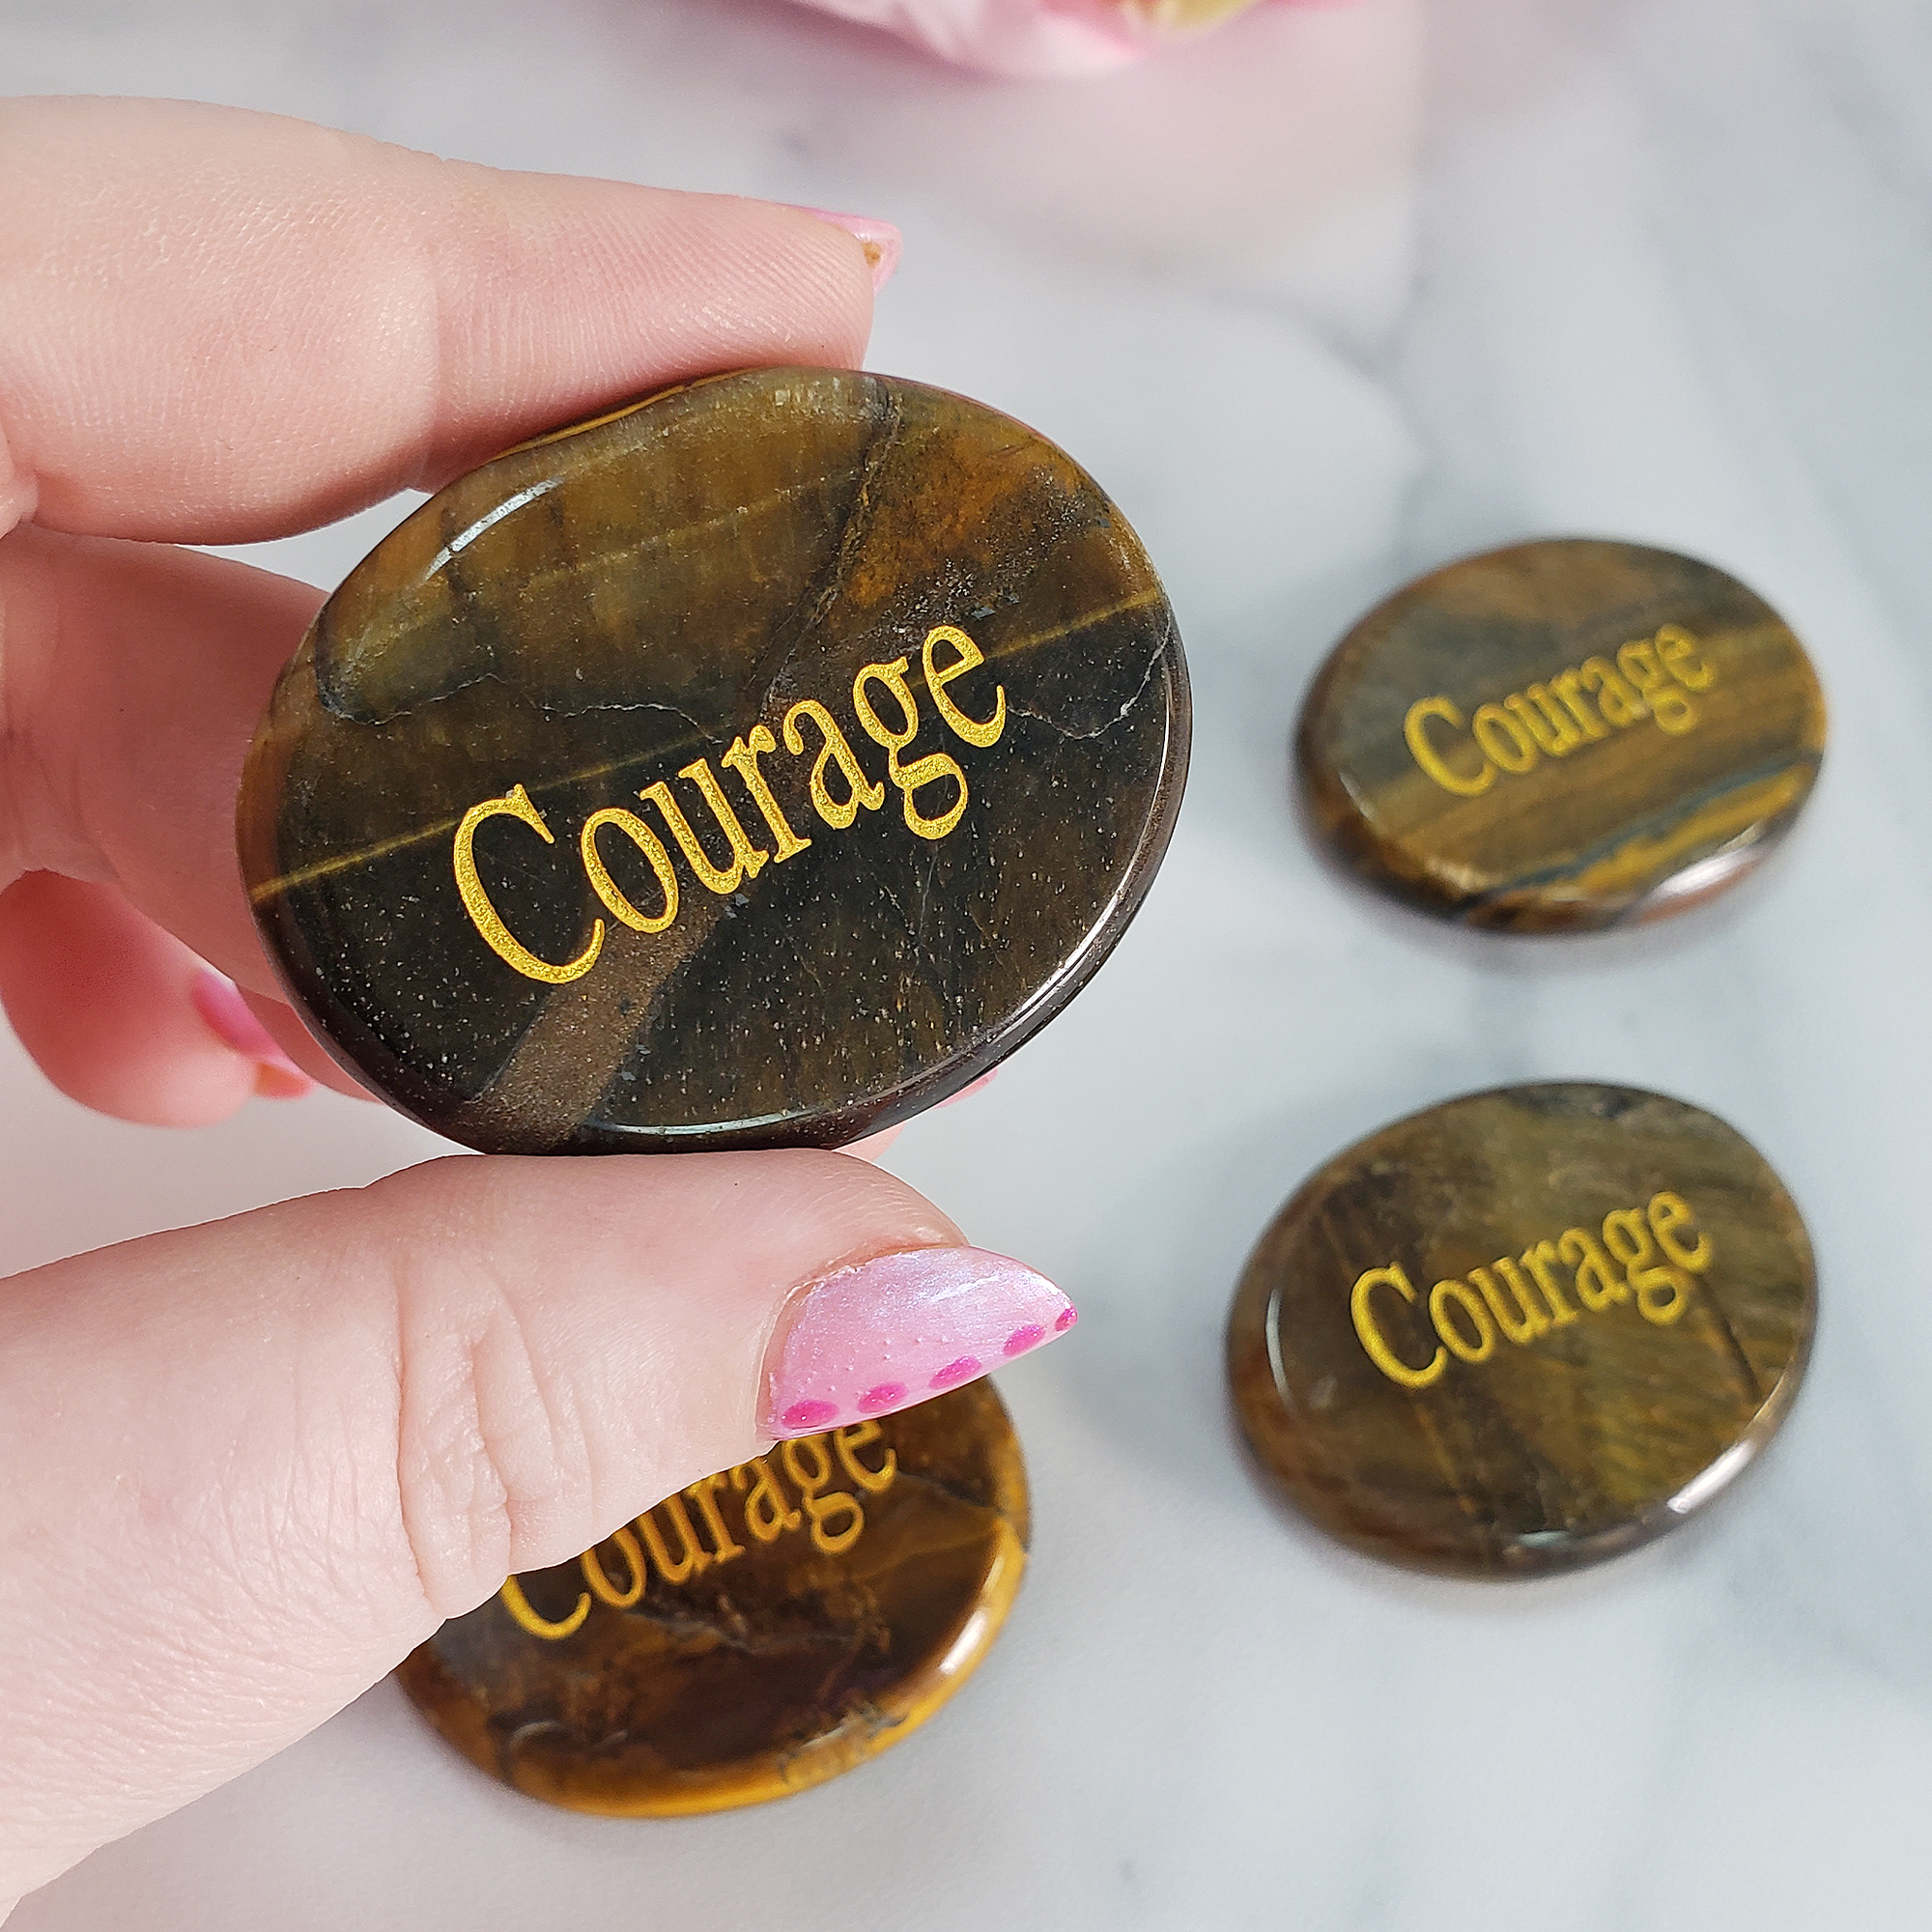 Tigers Eye Courage Affirmation Palm Stone | Natural Crystal Worry Stone with "Courage" Engraving - Close Up